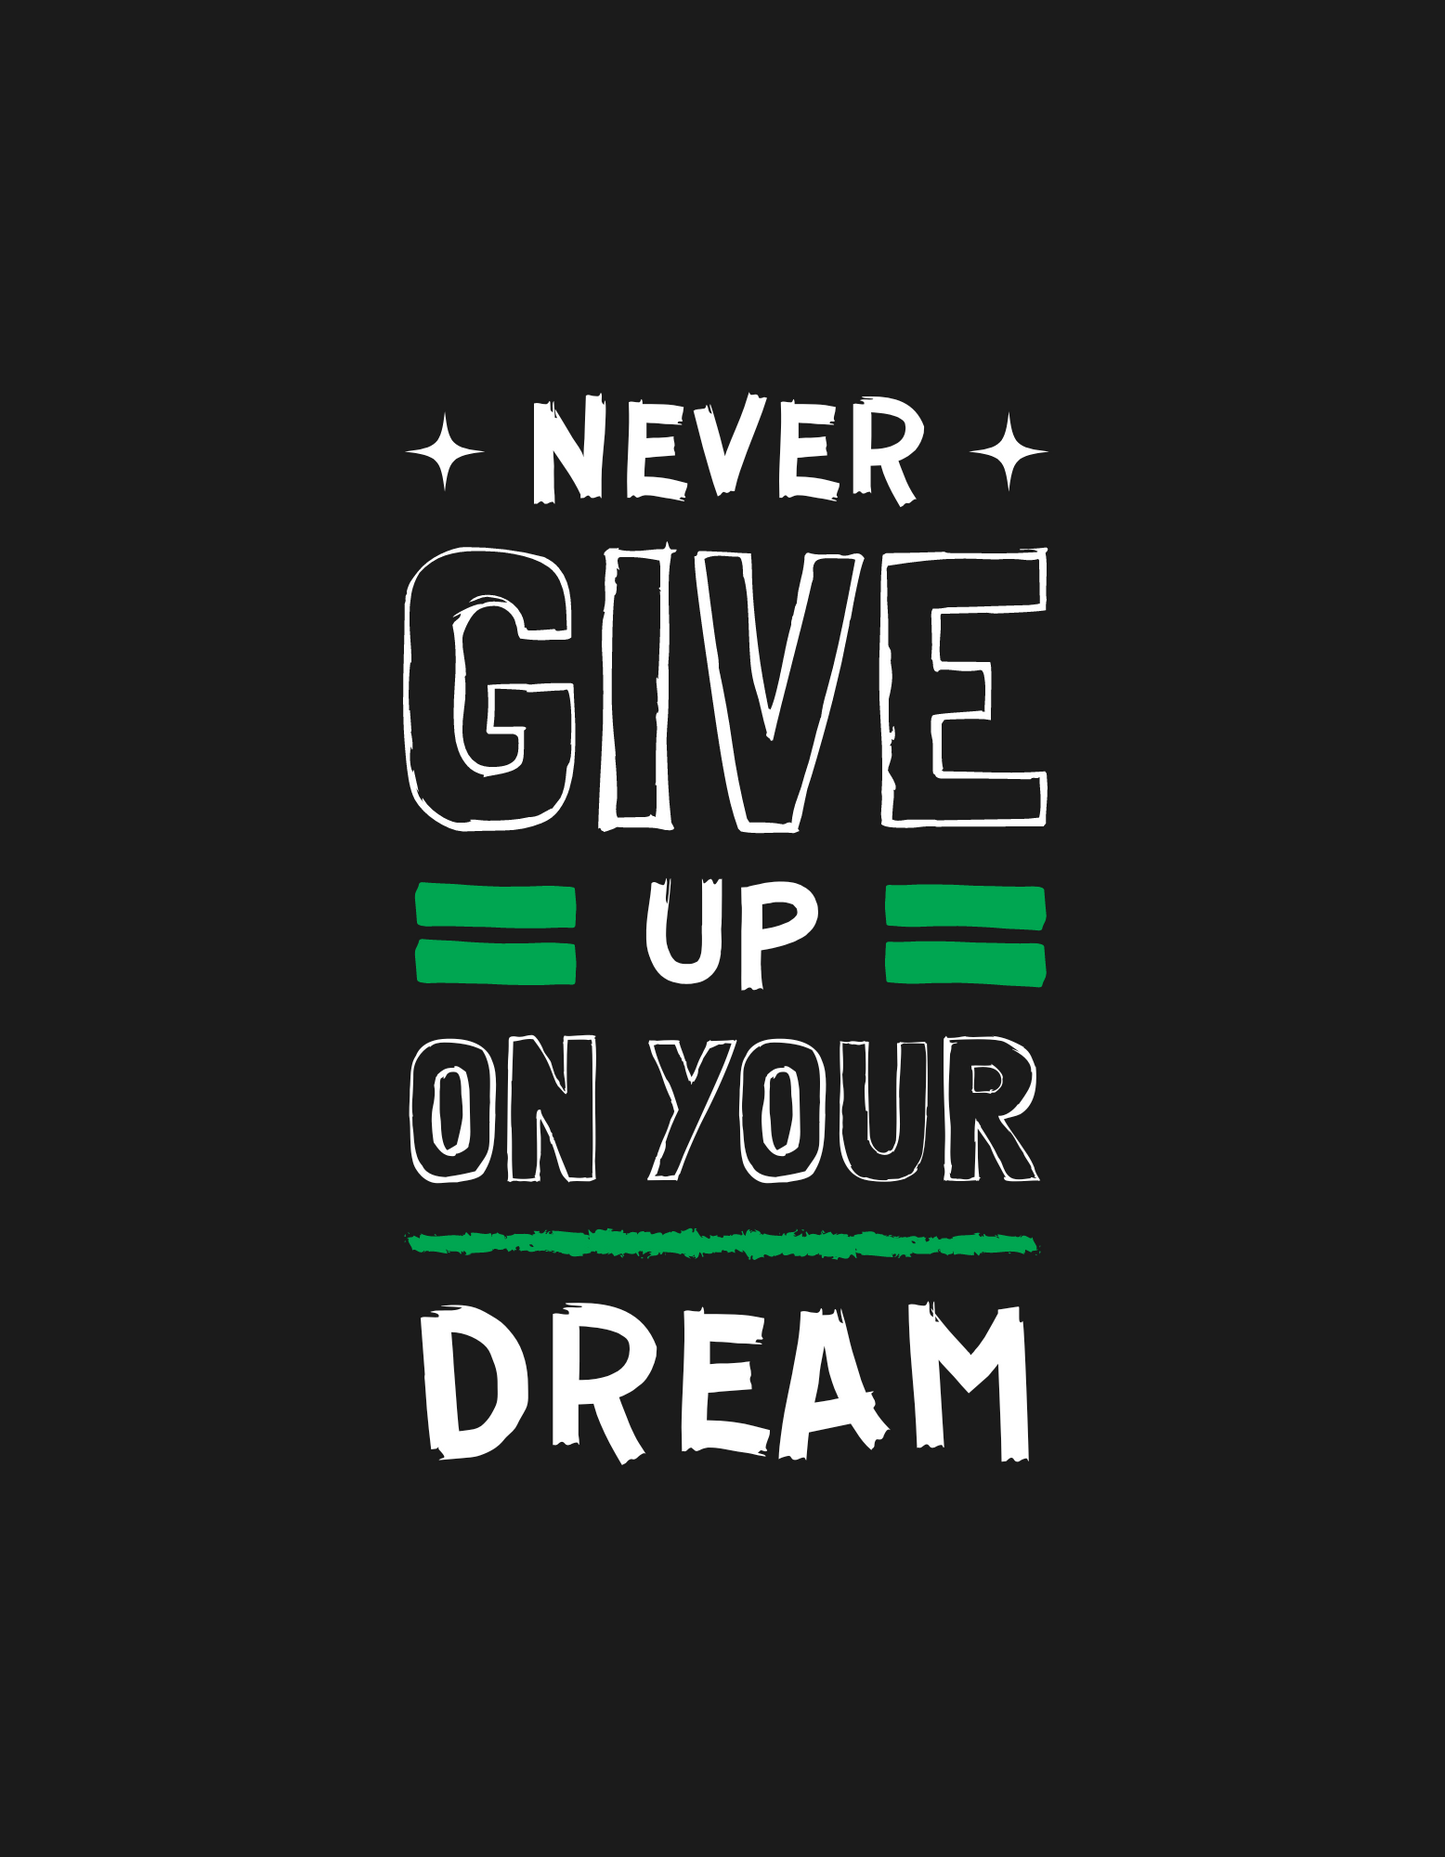 Naver give upon your dream